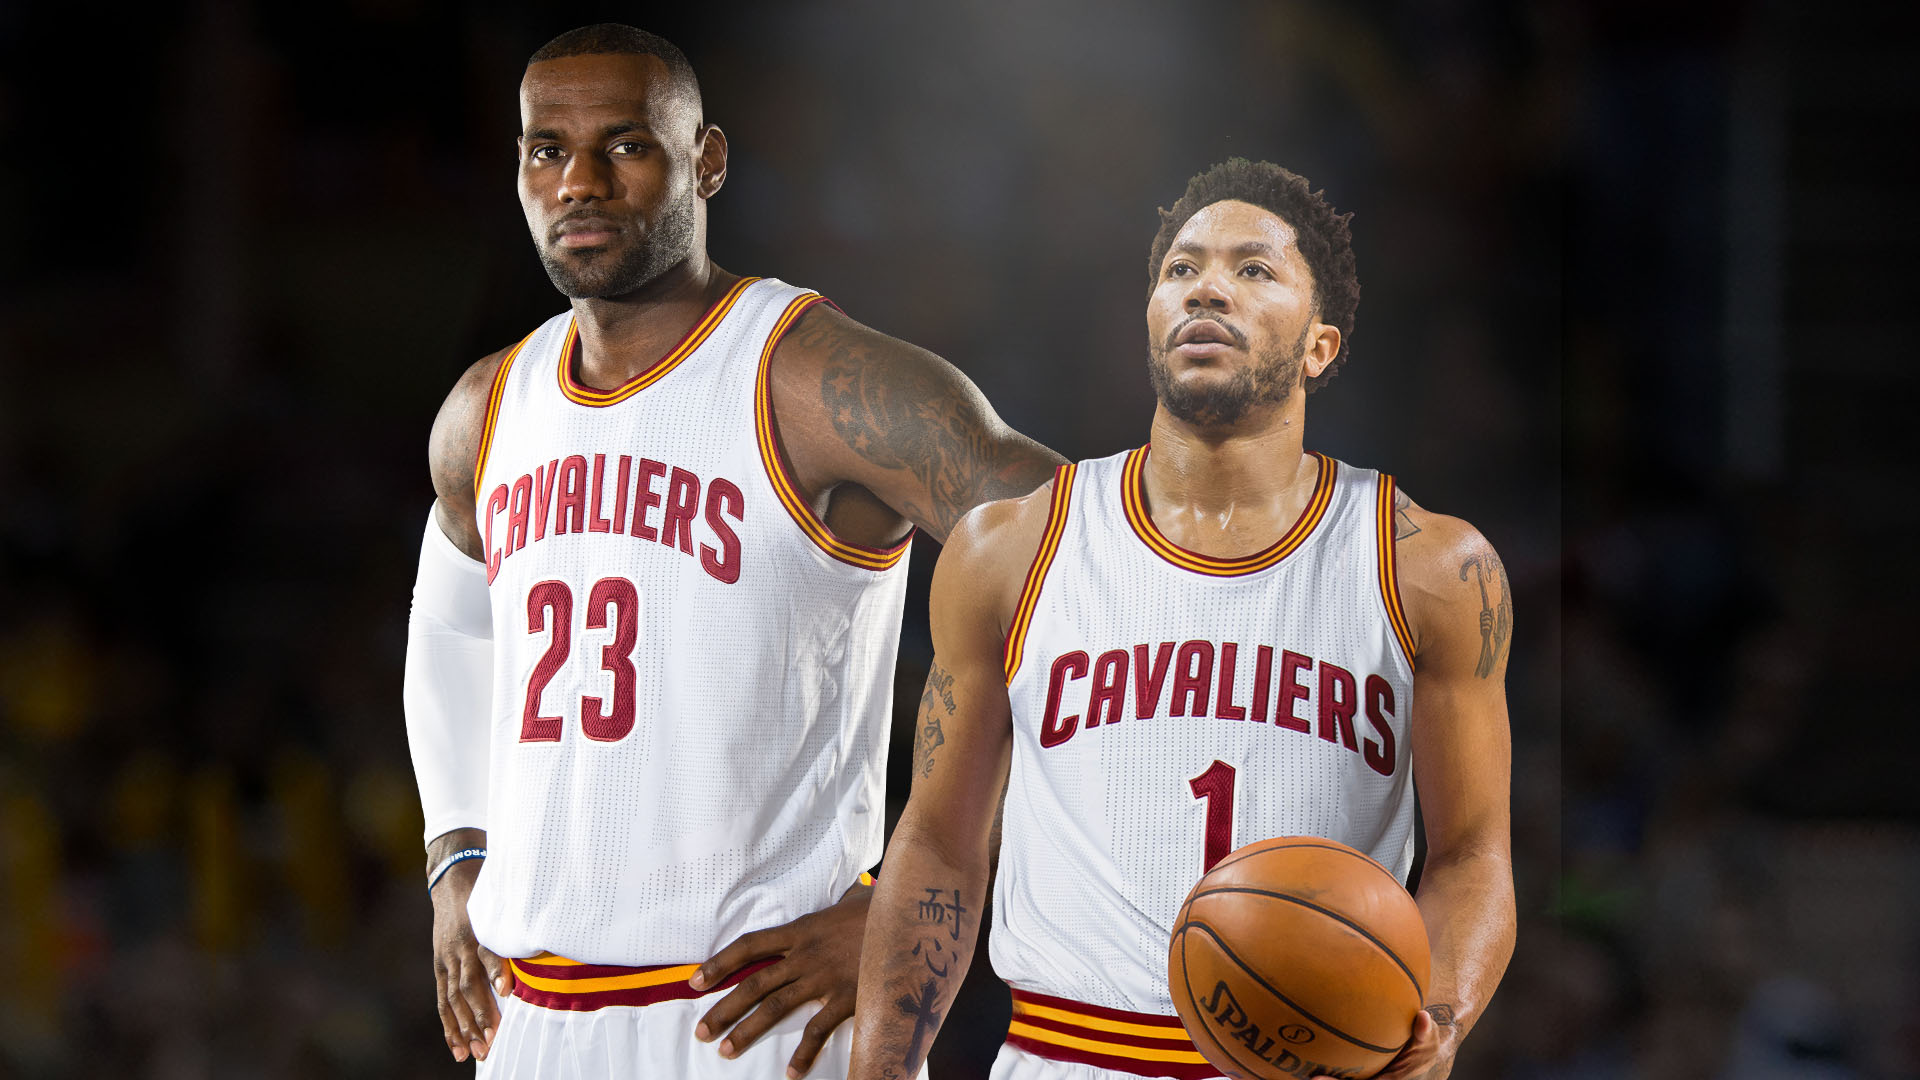 Cleveland Cavaliers to start Dwyane Wade with Derrick Rose, LeBron James